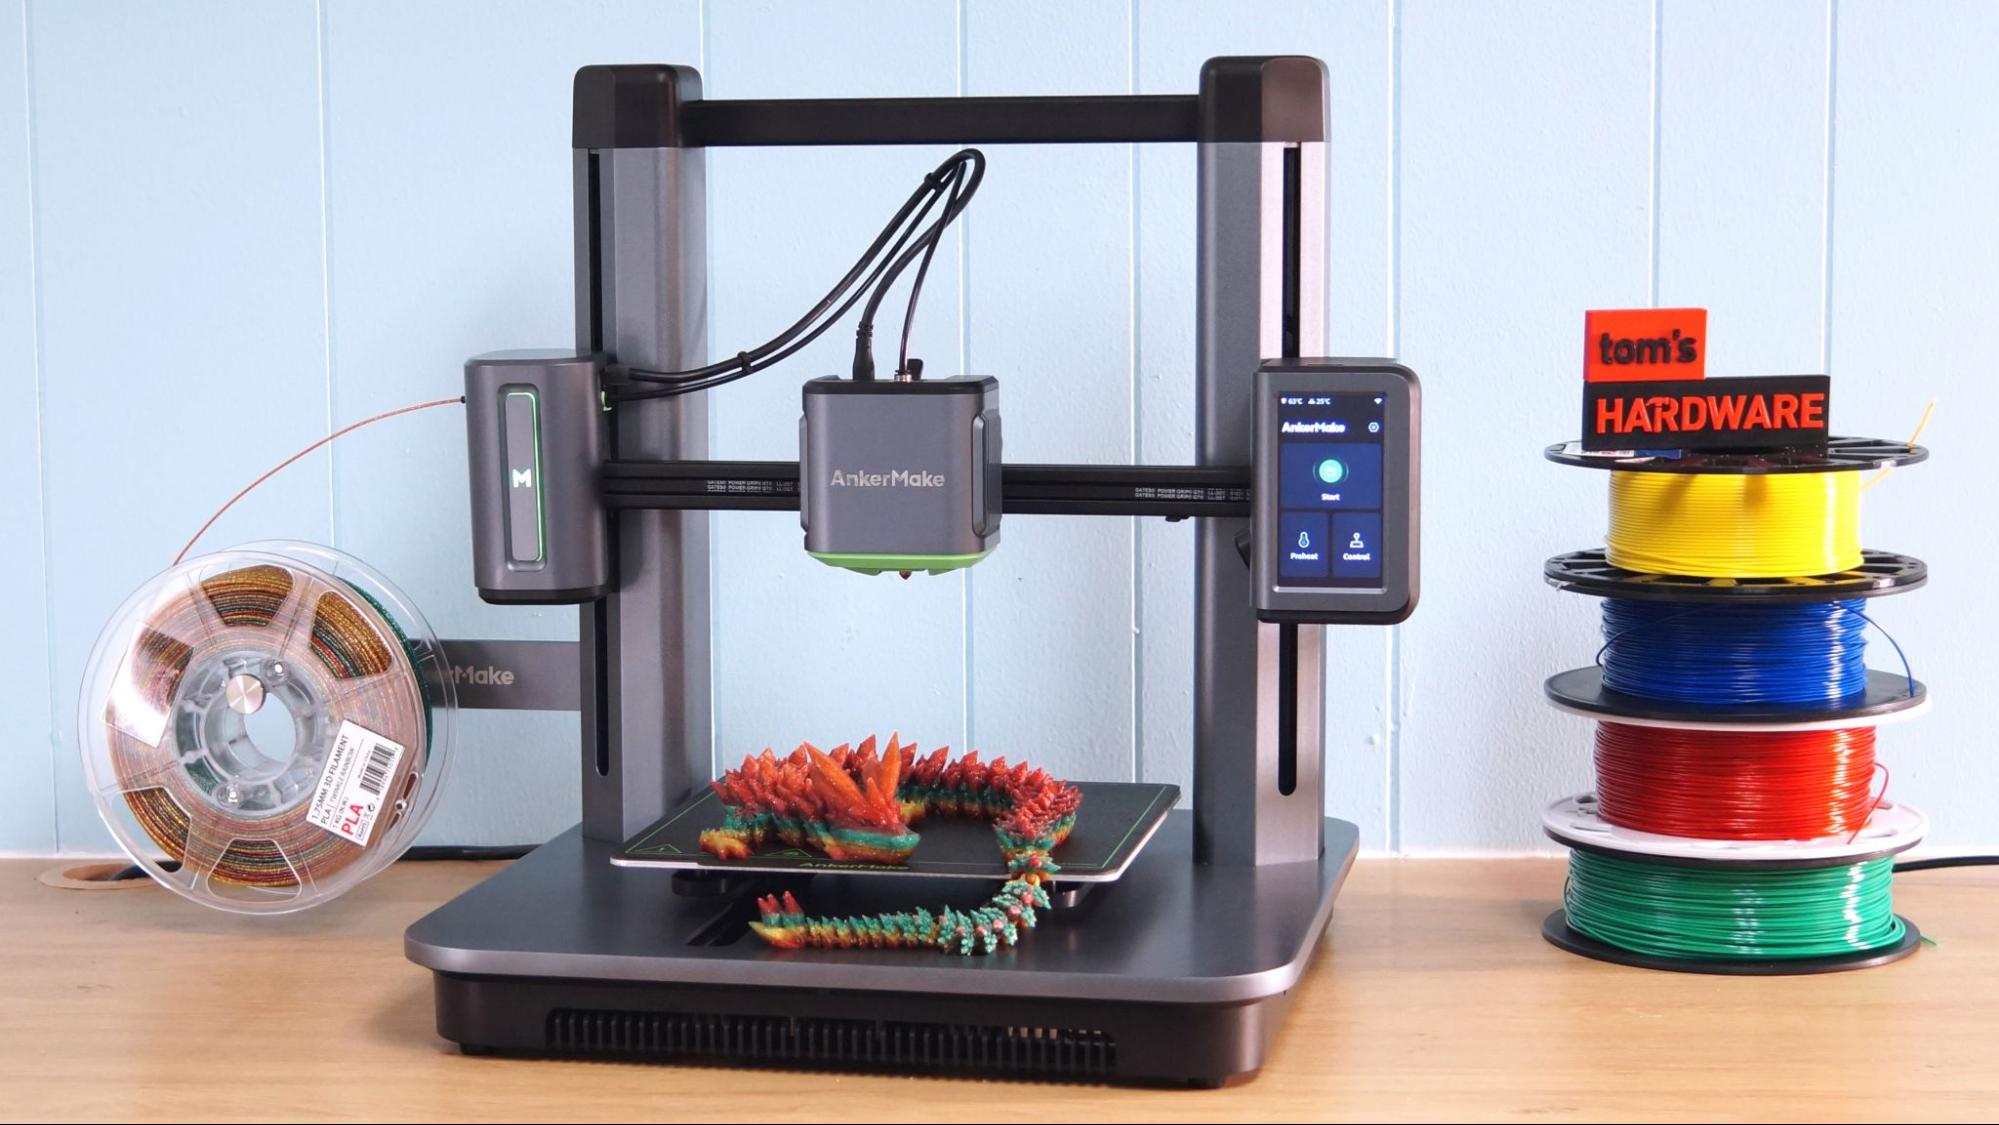 AnkerMake M5C Review: Great Budget 3D Printer With a Catch - CNET